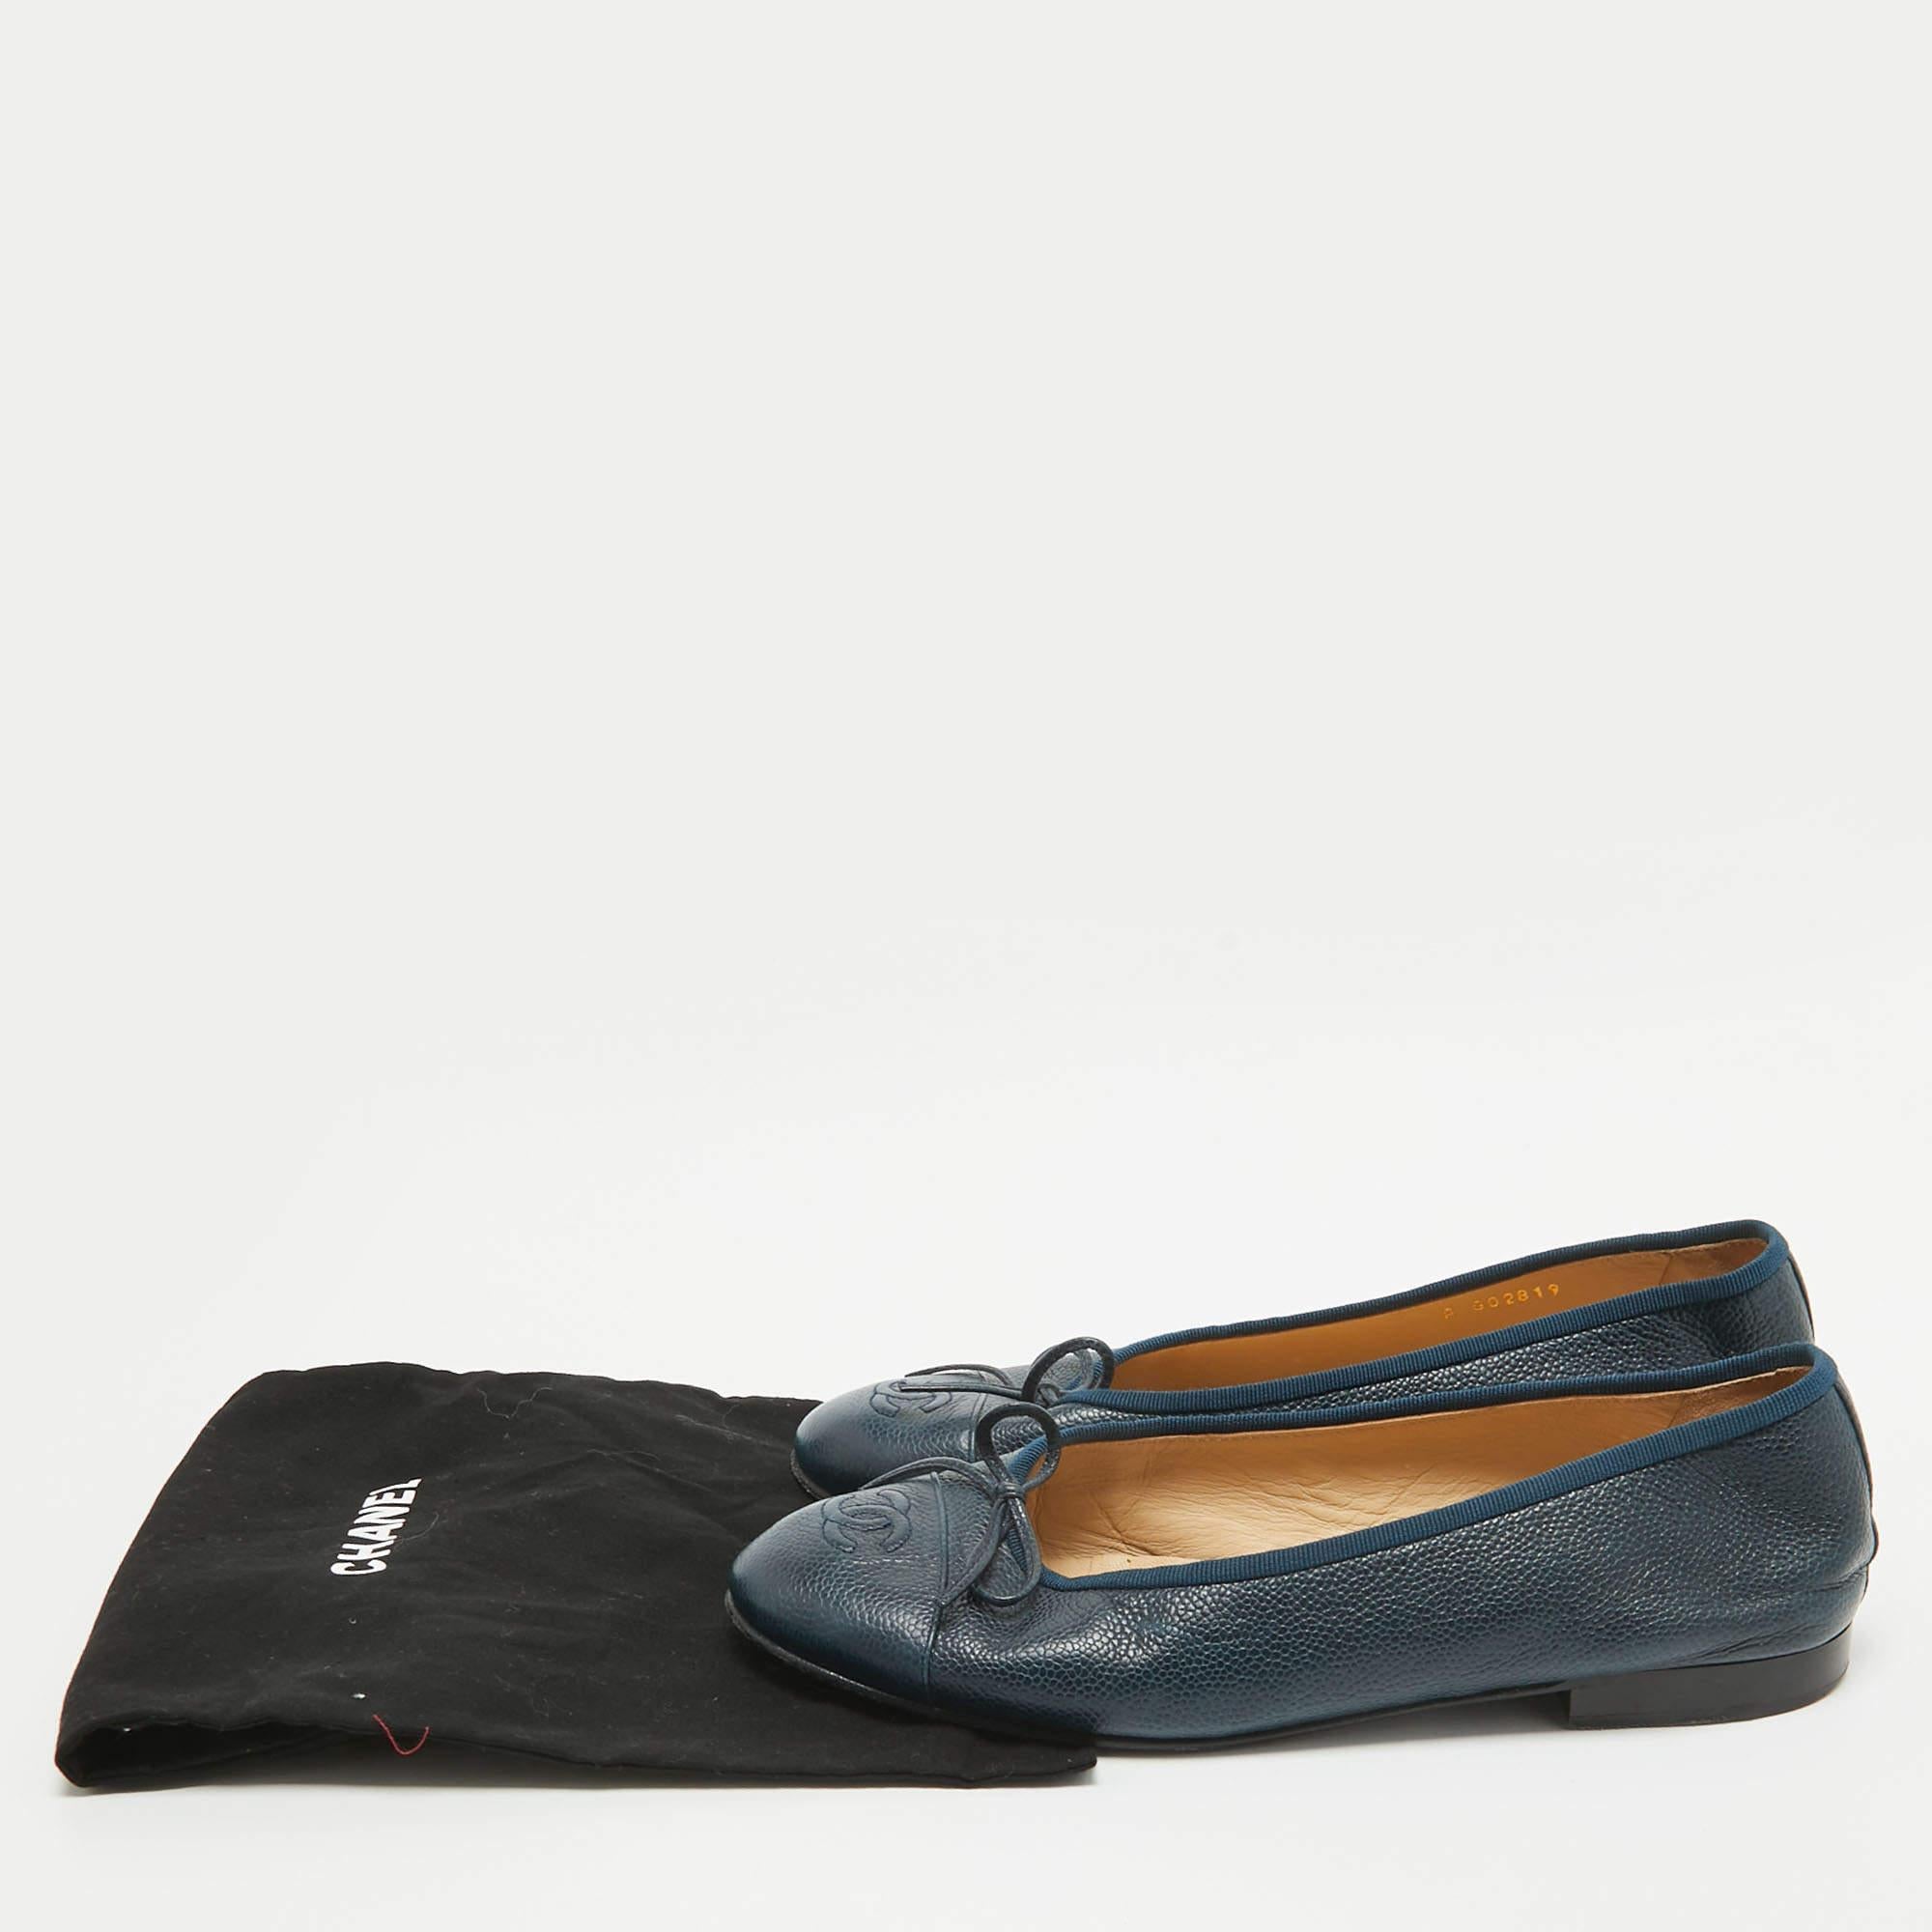 Chanel Dark Blue Leather CC Ballet Flats Size 38 For Sale 6